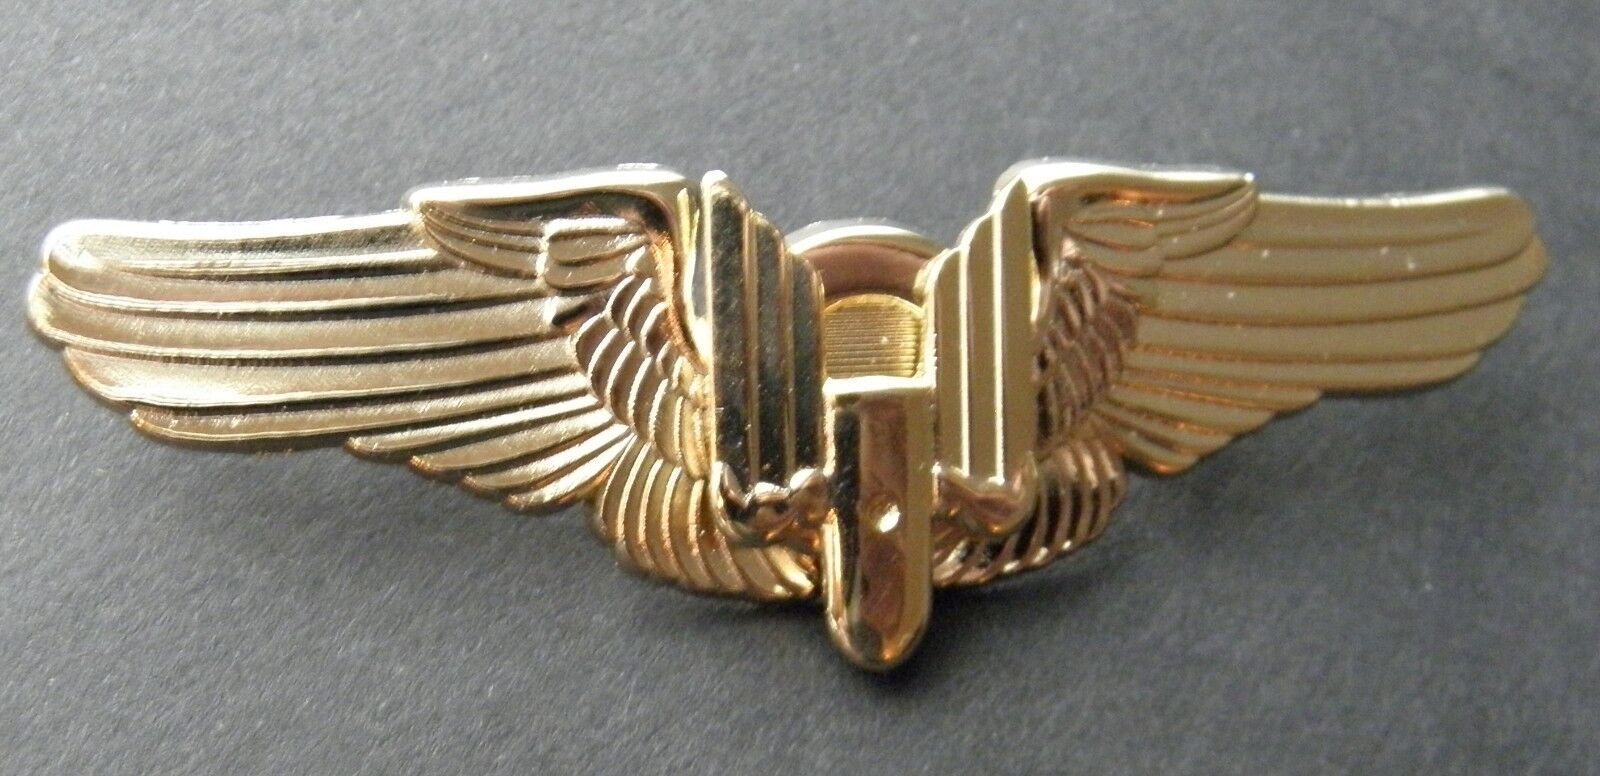 AERIAL GUNNER USAF AIR FORCE JUMP GOLD COLORED WINGS JACKET PIN BADGE 3 INCHES - $7.55